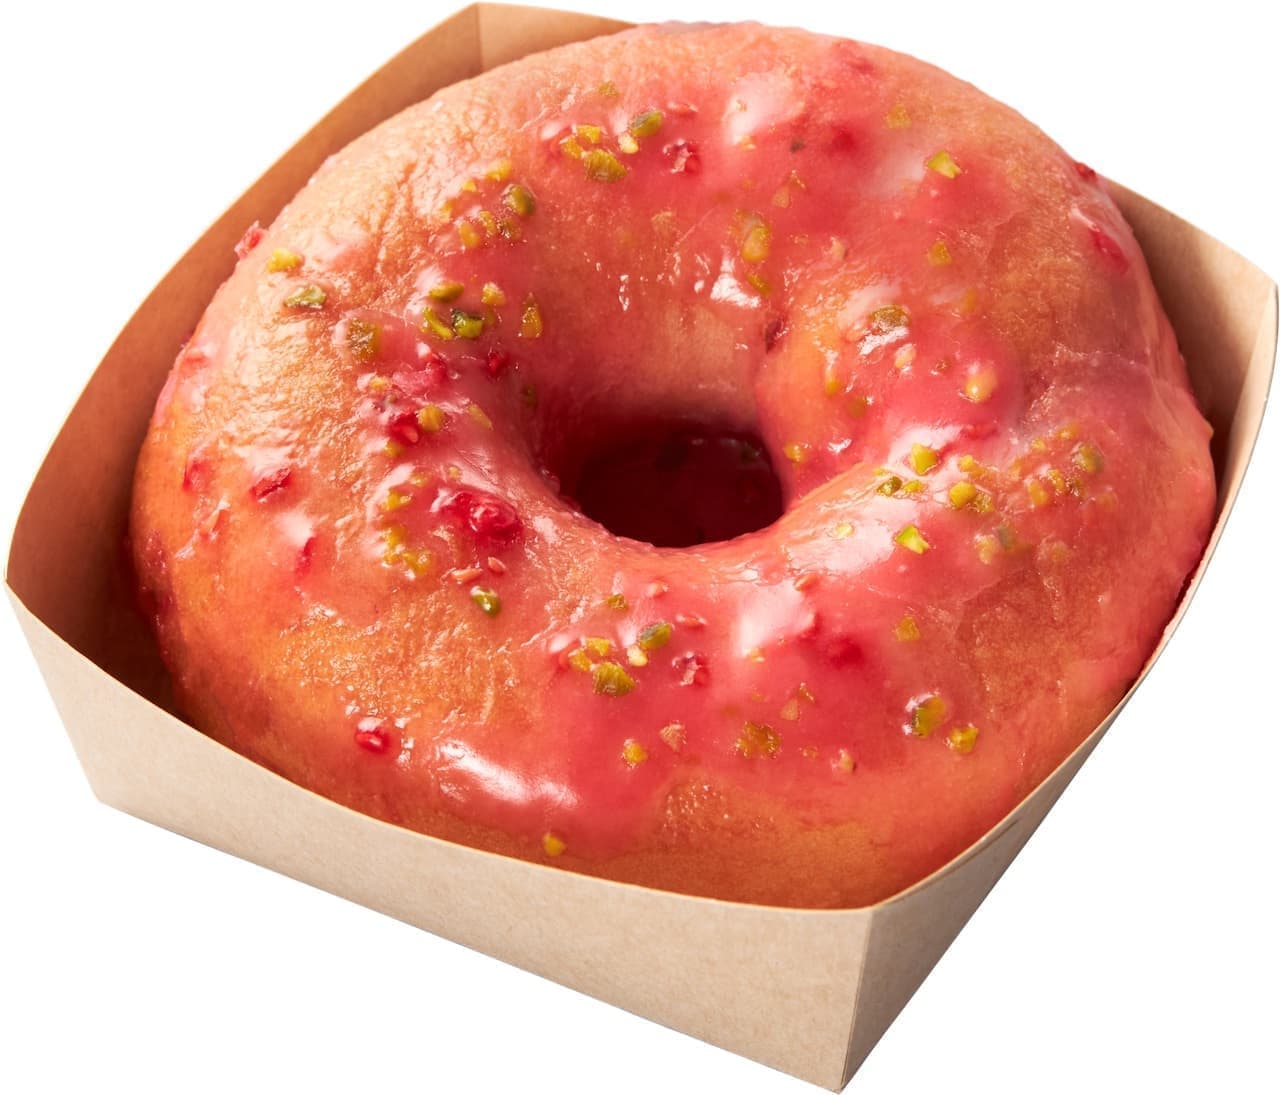 Natural Lawson "Raspberry Baked Donut